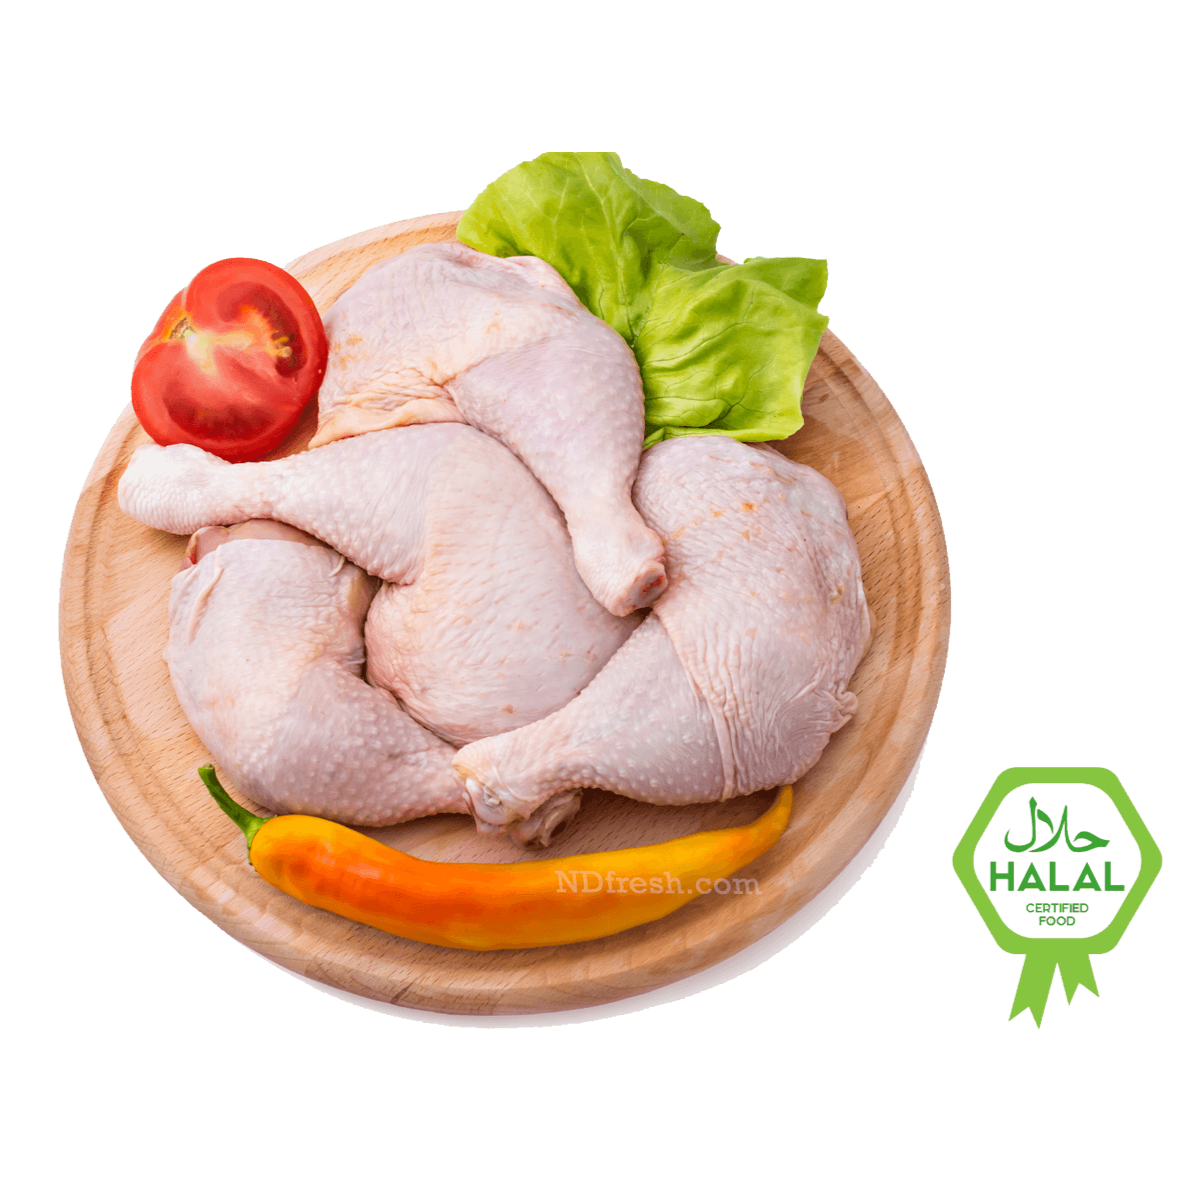 Halal Fresh Chicken Legs from ndfresh meat online delivery toronto